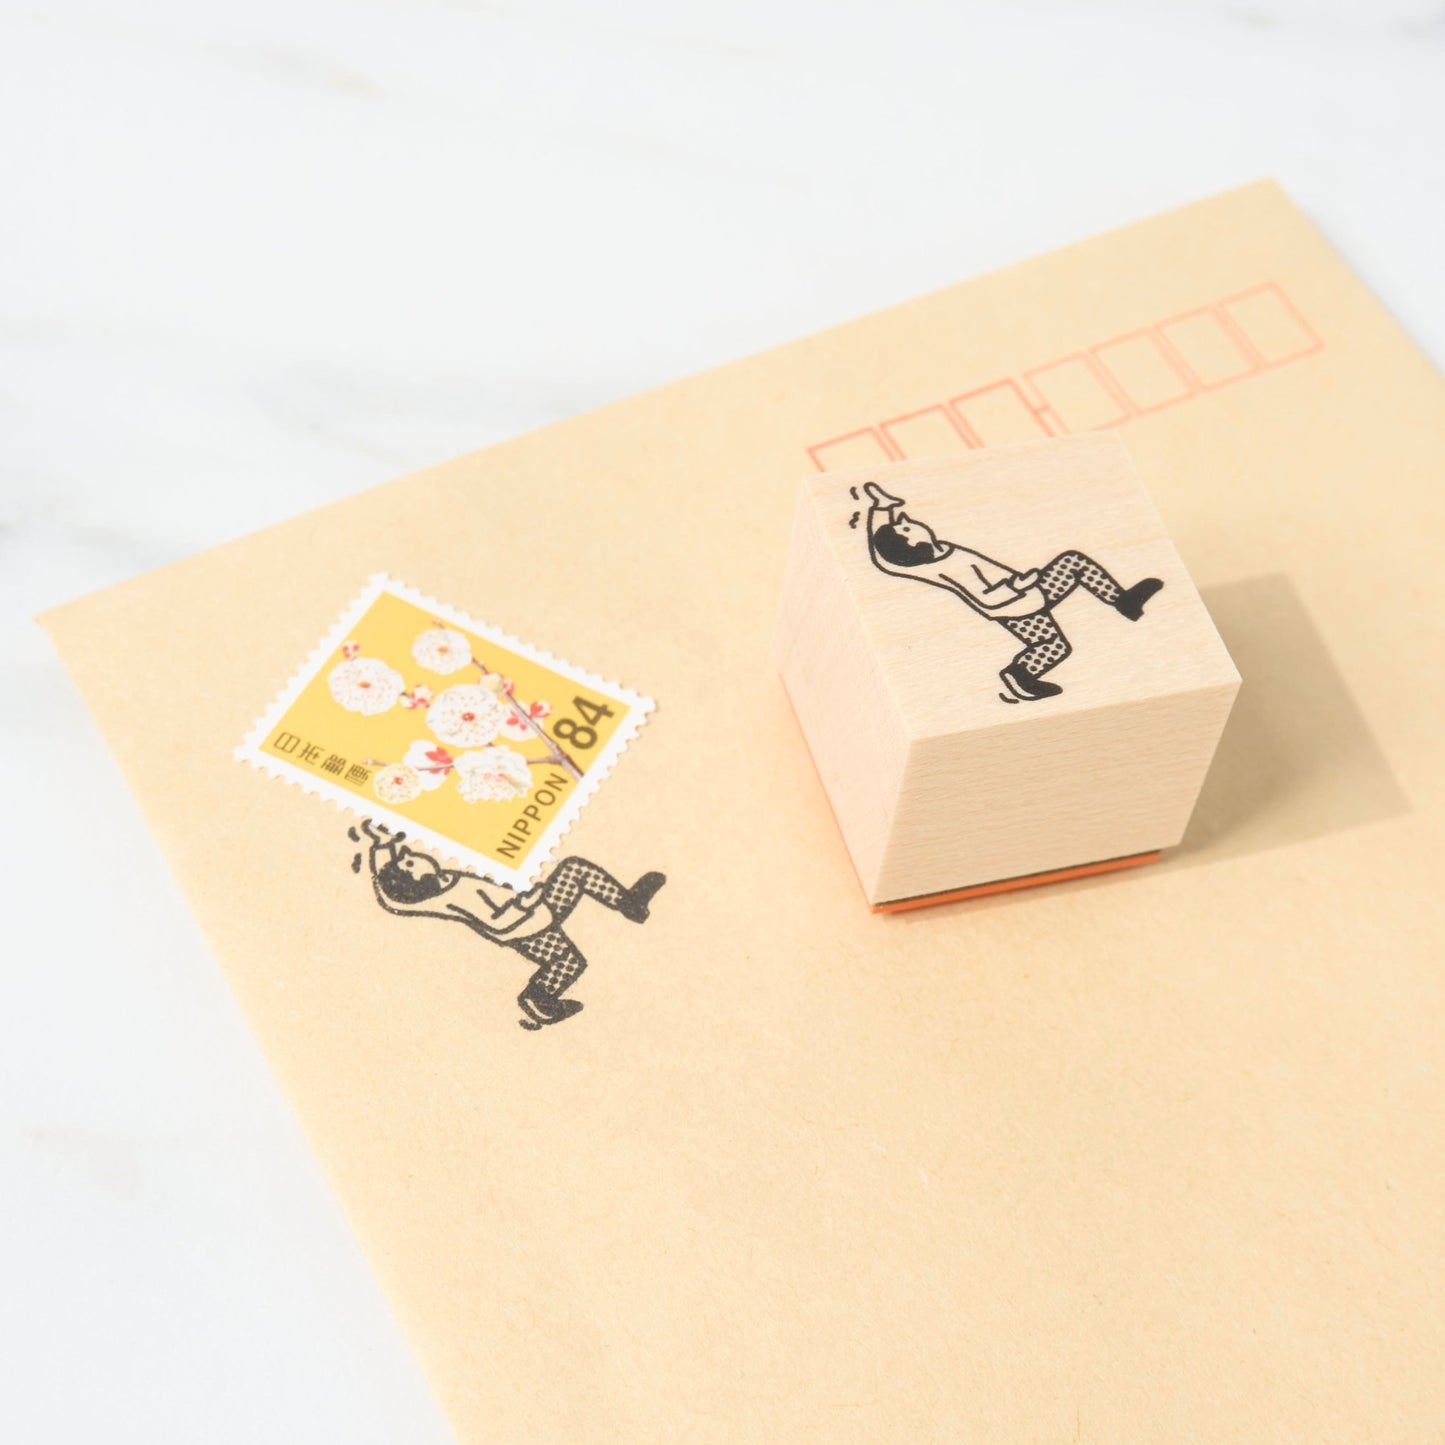 A Small World Around Stamps First Series / Kitte No Kobito